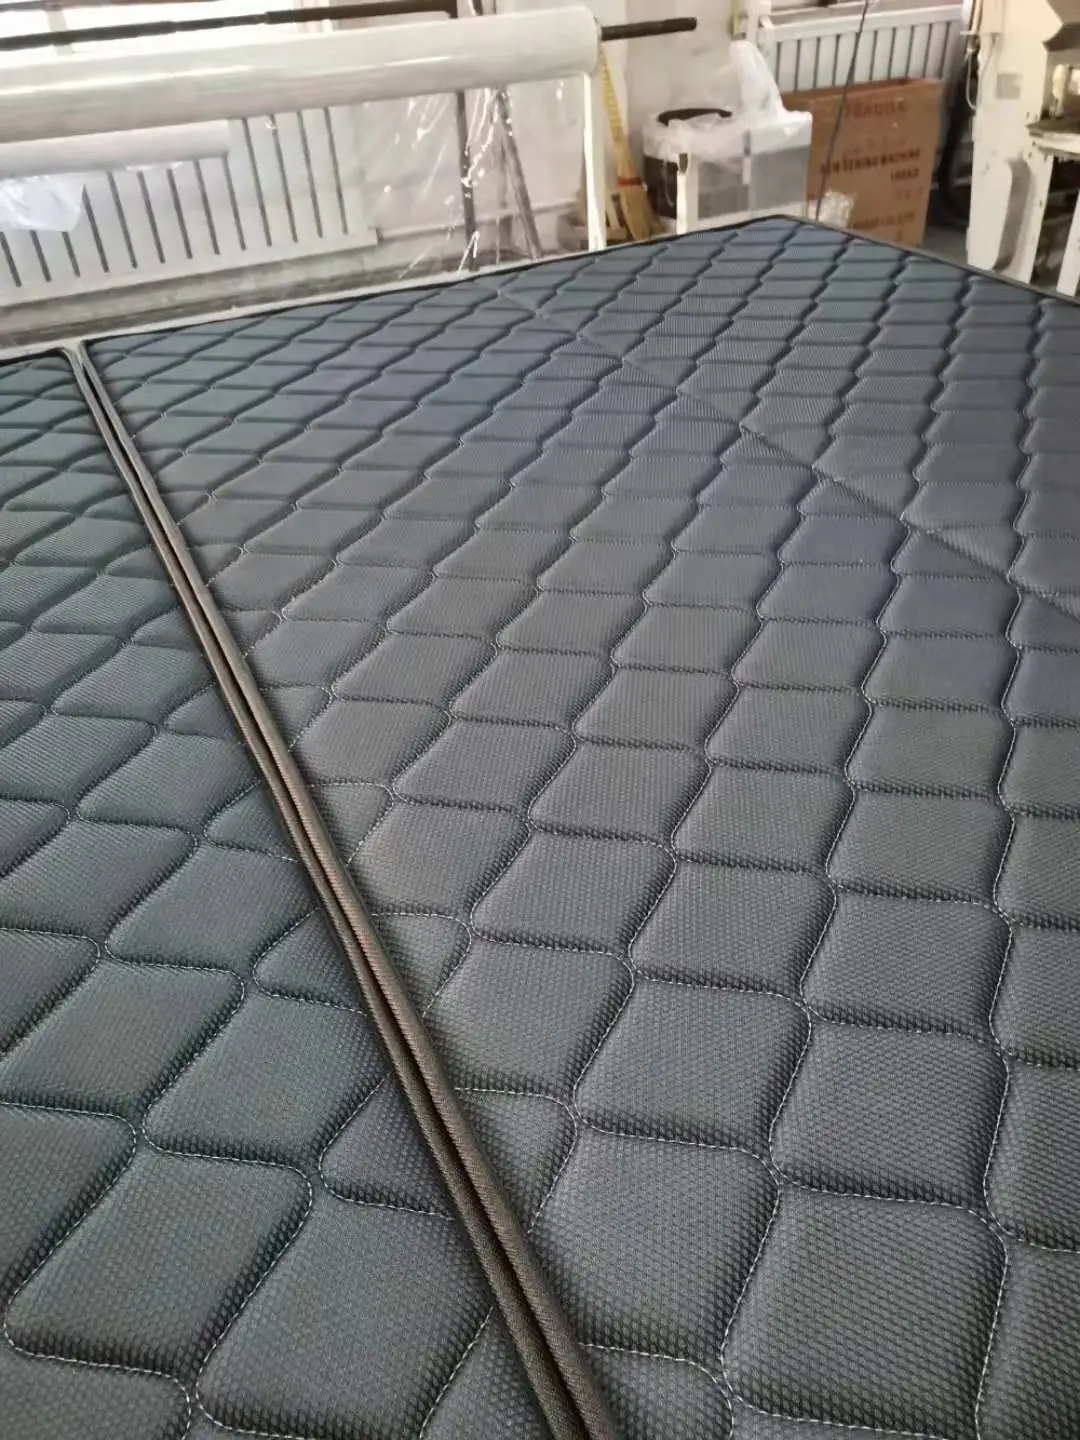 full size price reasonable and have a good sales 3 folding mattress for sales